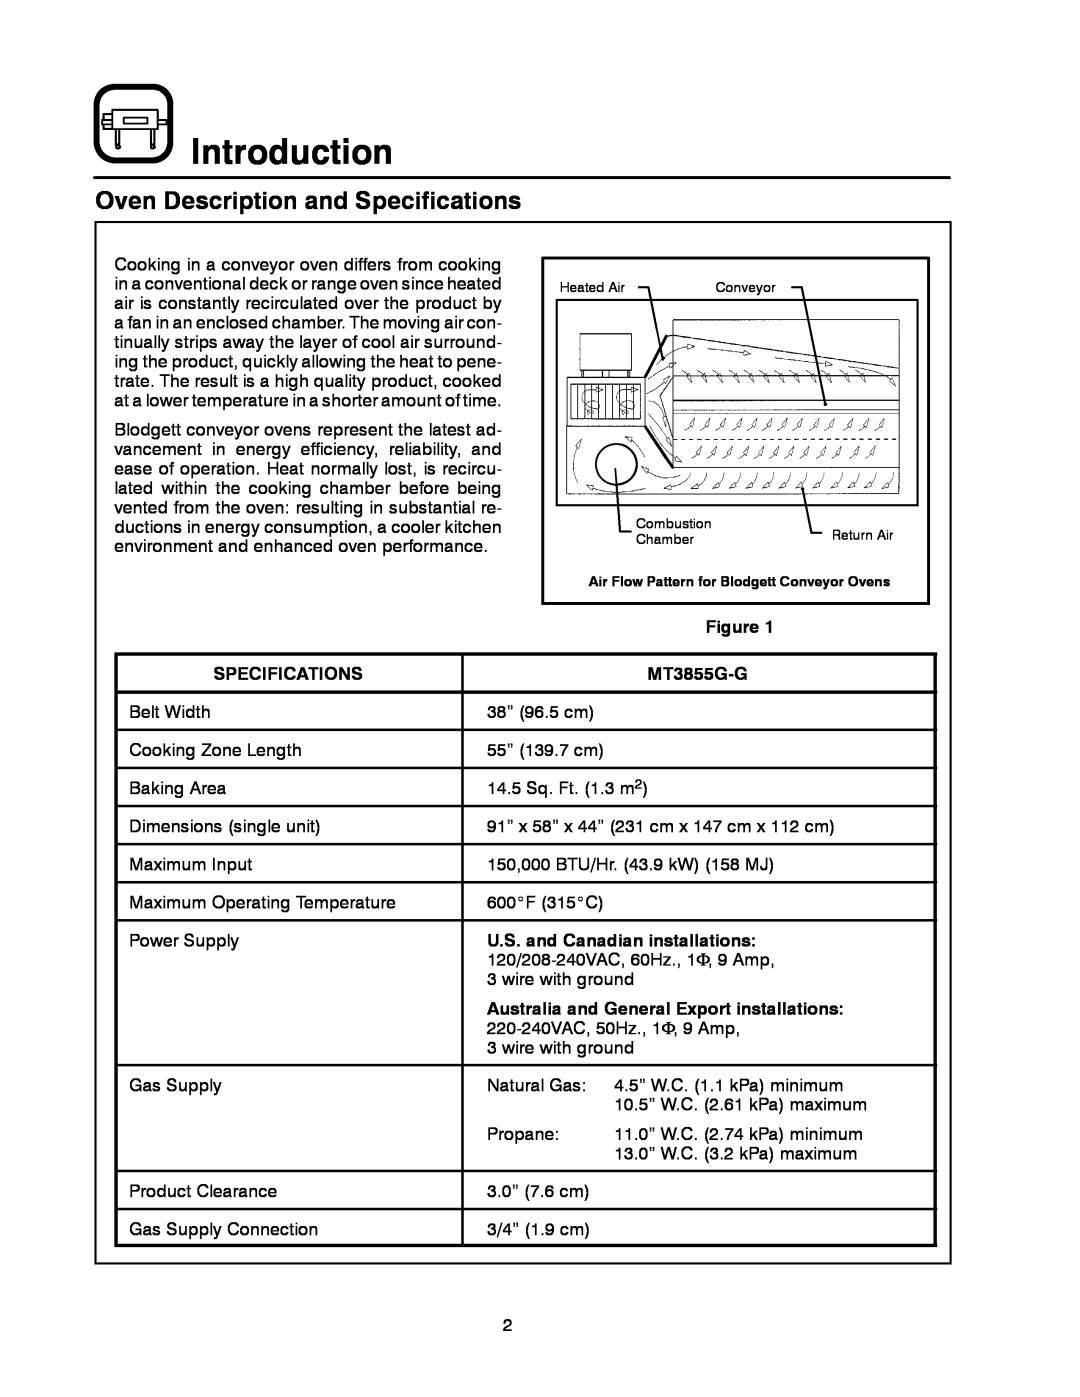 Blodgett MT3855G-G manual Introduction, Oven Description and Specifications, U.S. and Canadian installations 